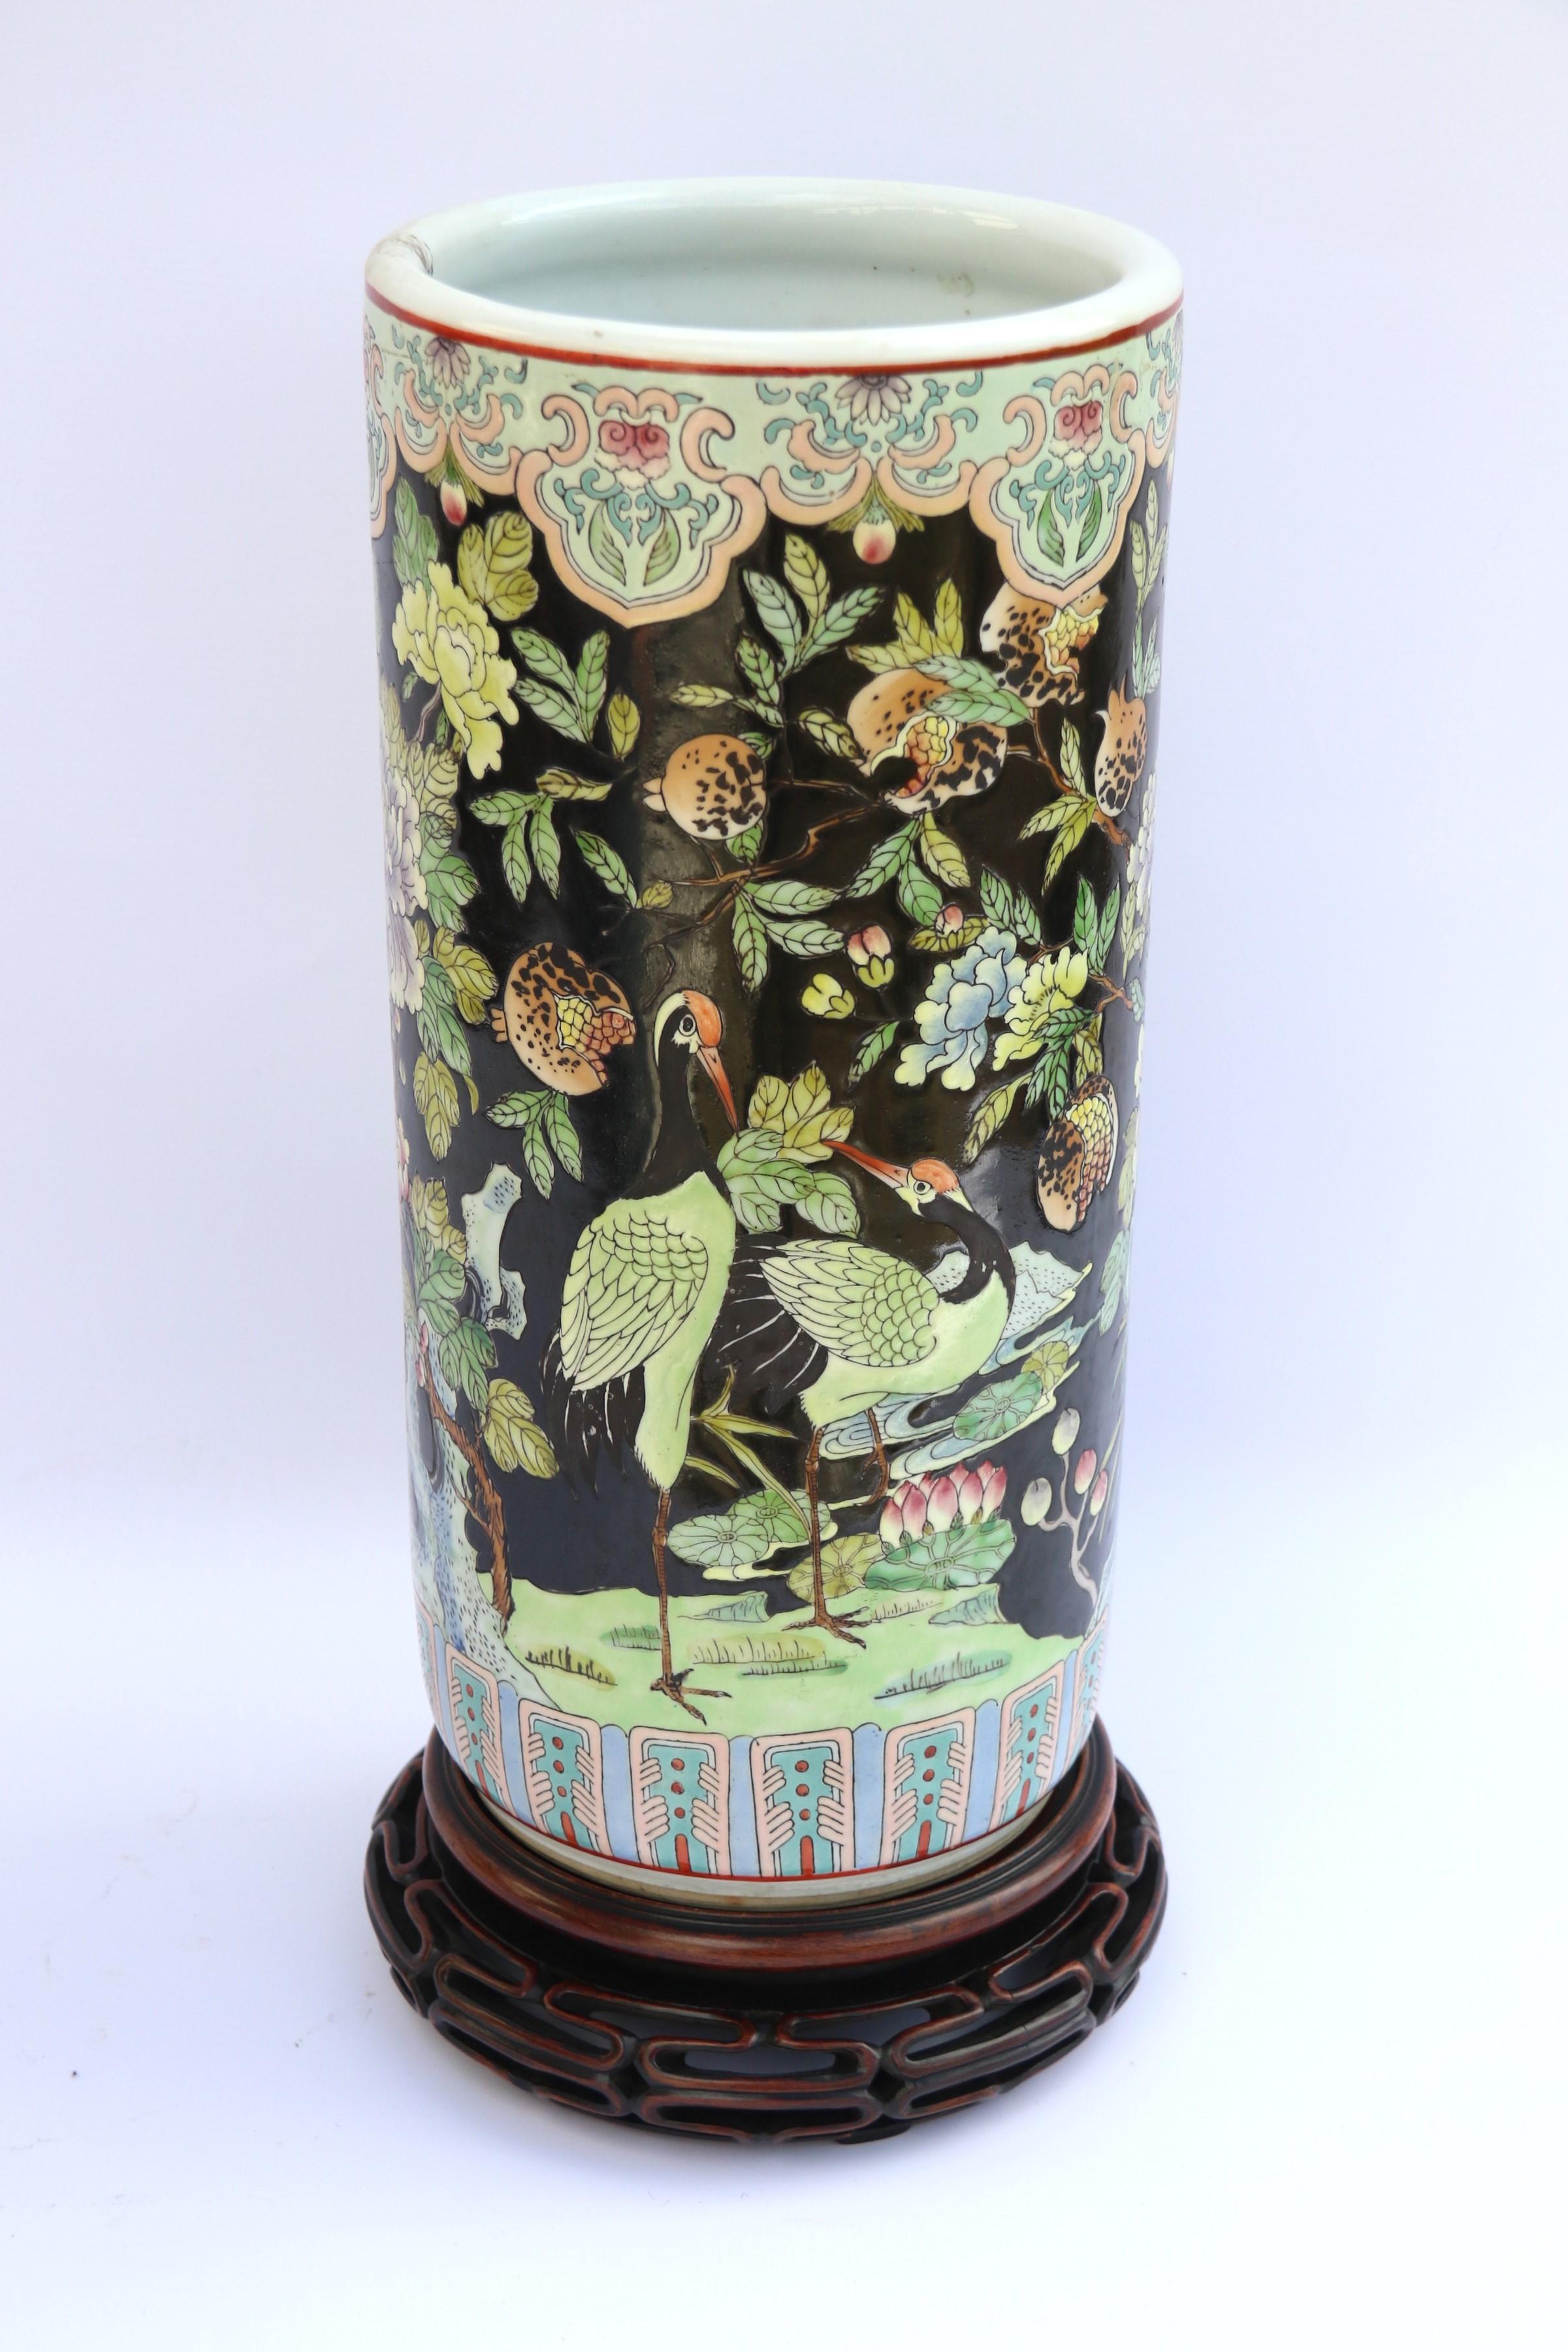 This most decorative large Chinese famille noire vase or possibly a walking stick stand dates to circa 1930 and it is richly decorated over a black enamel background (noire) with thick brightly coloured hand painted enamels with exotic birds,